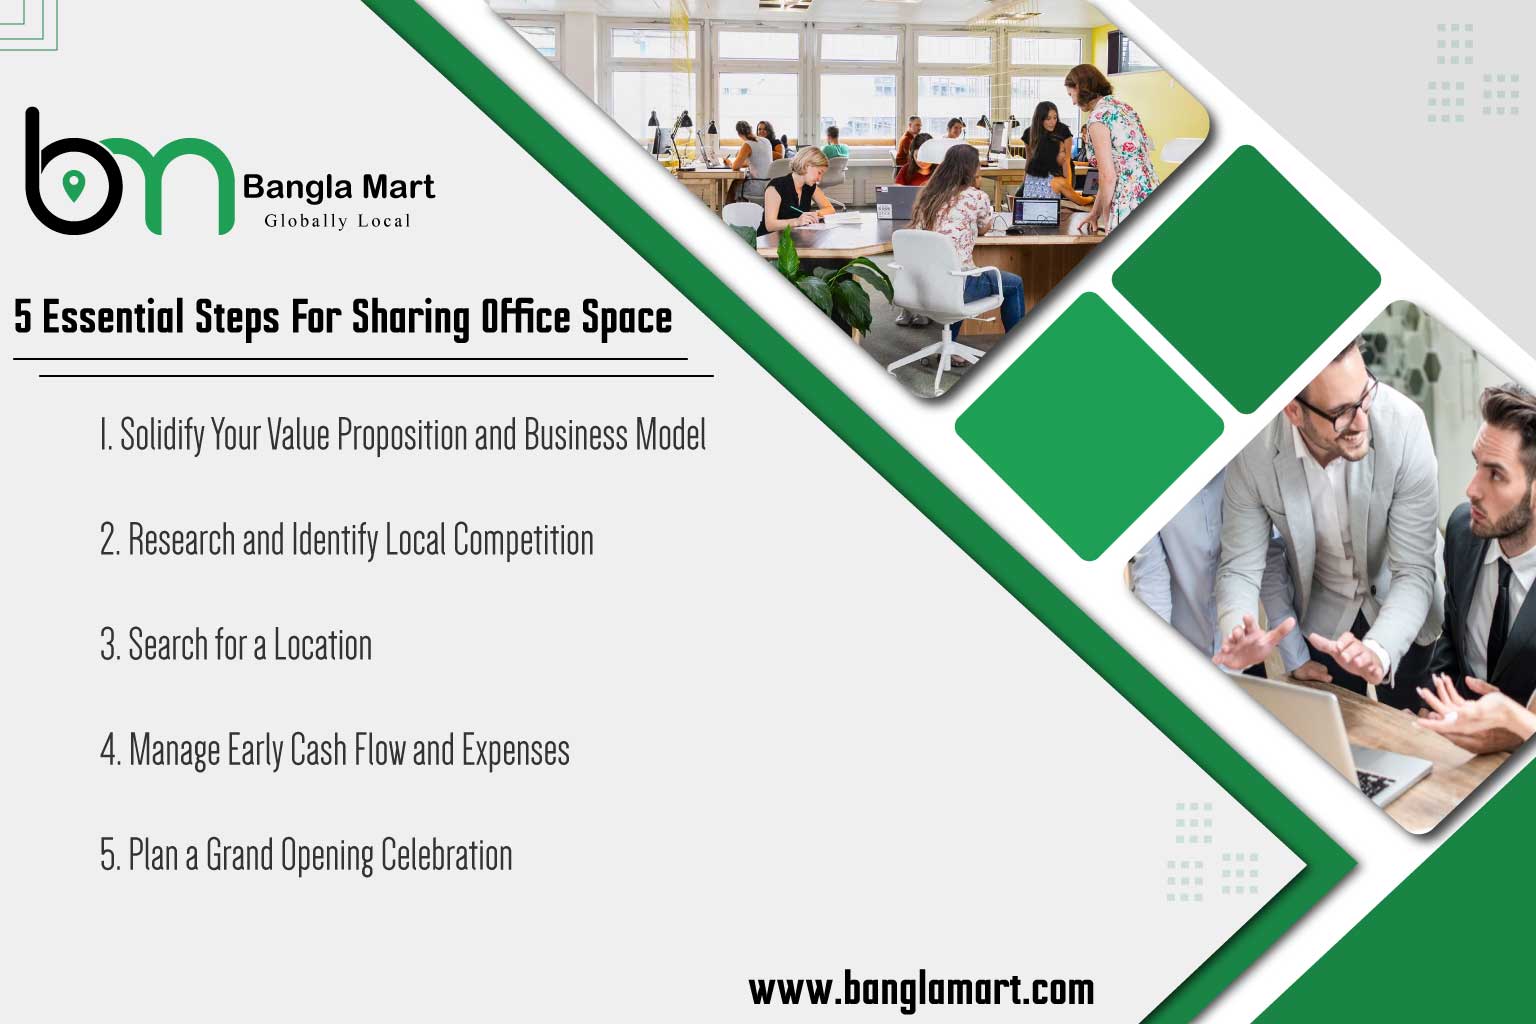 5 Essential Steps For Sharing Office Space